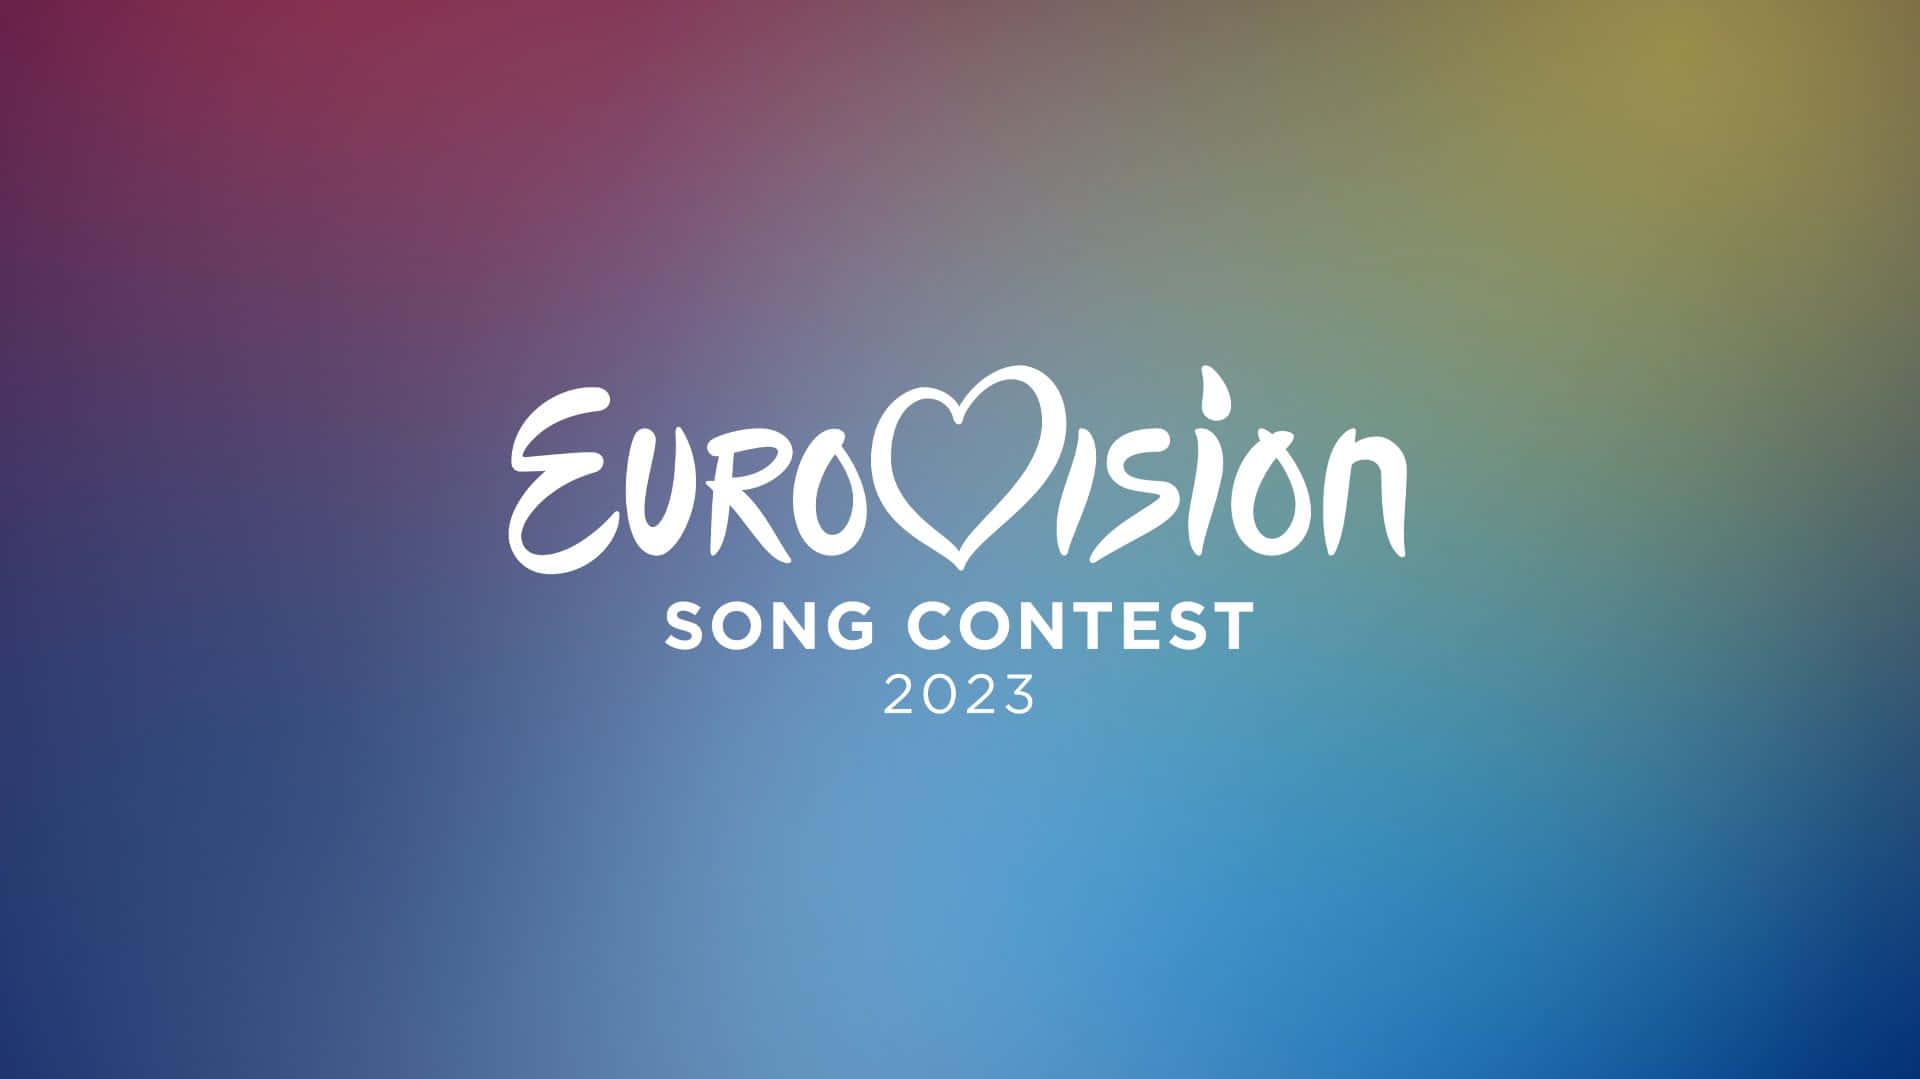 Eurovision Song Contest A Colorful Background With